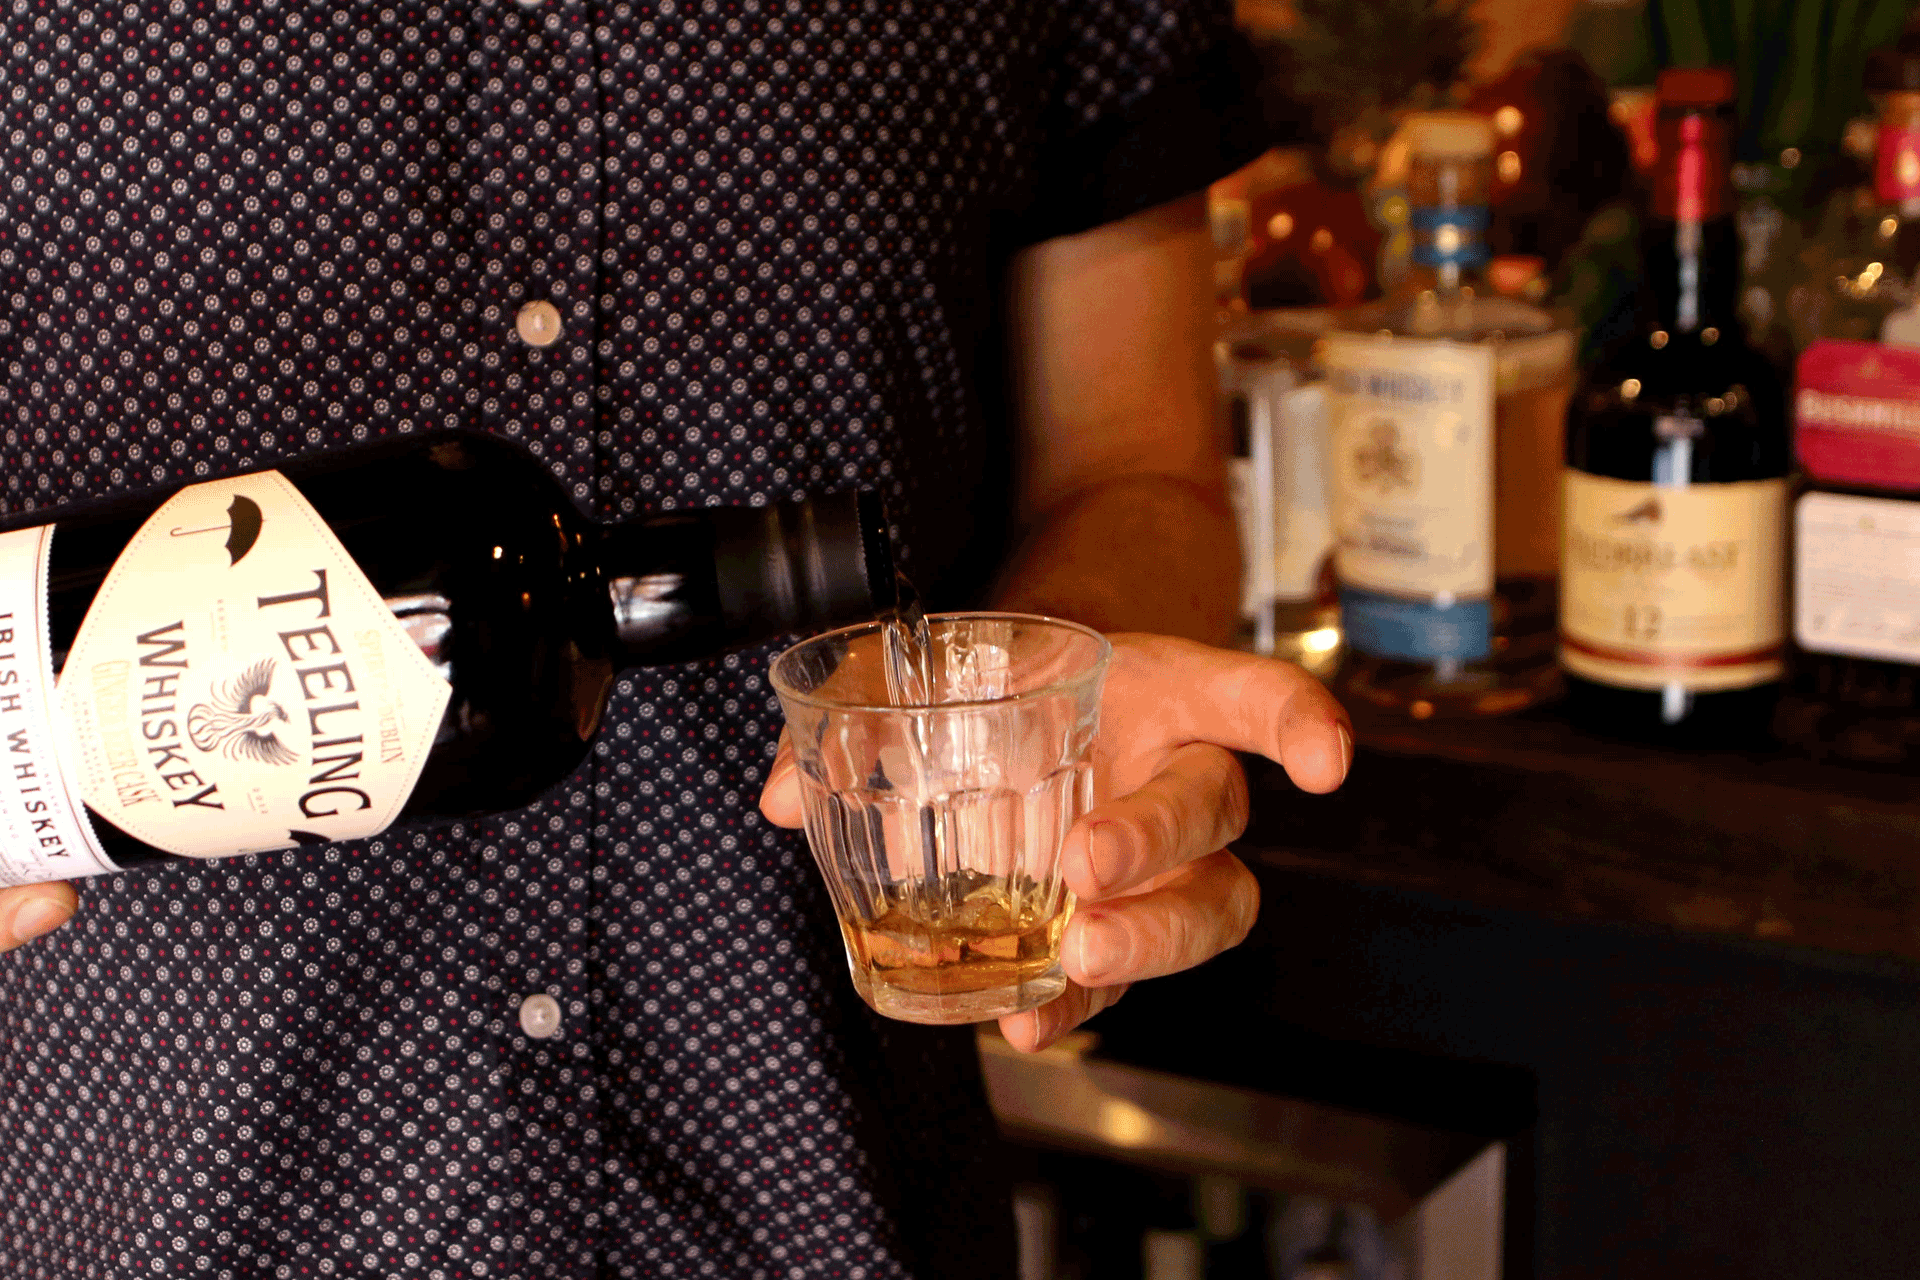 Man pouring whisky into a glass.